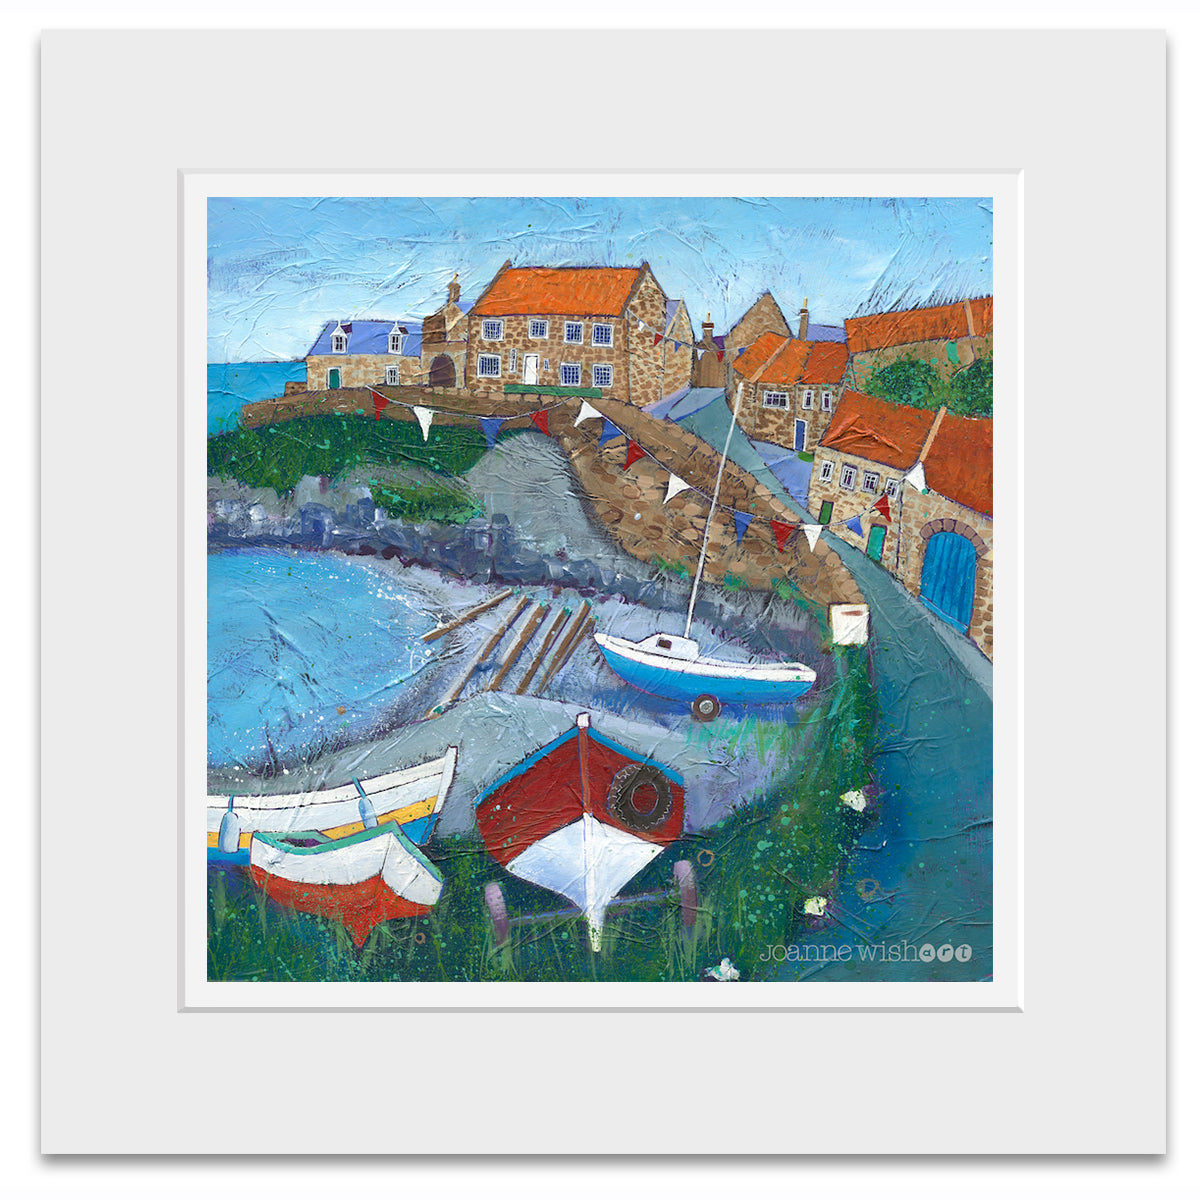 A mounted print of Craster in Northumberland featuring colourful boats and bunting in the bay.